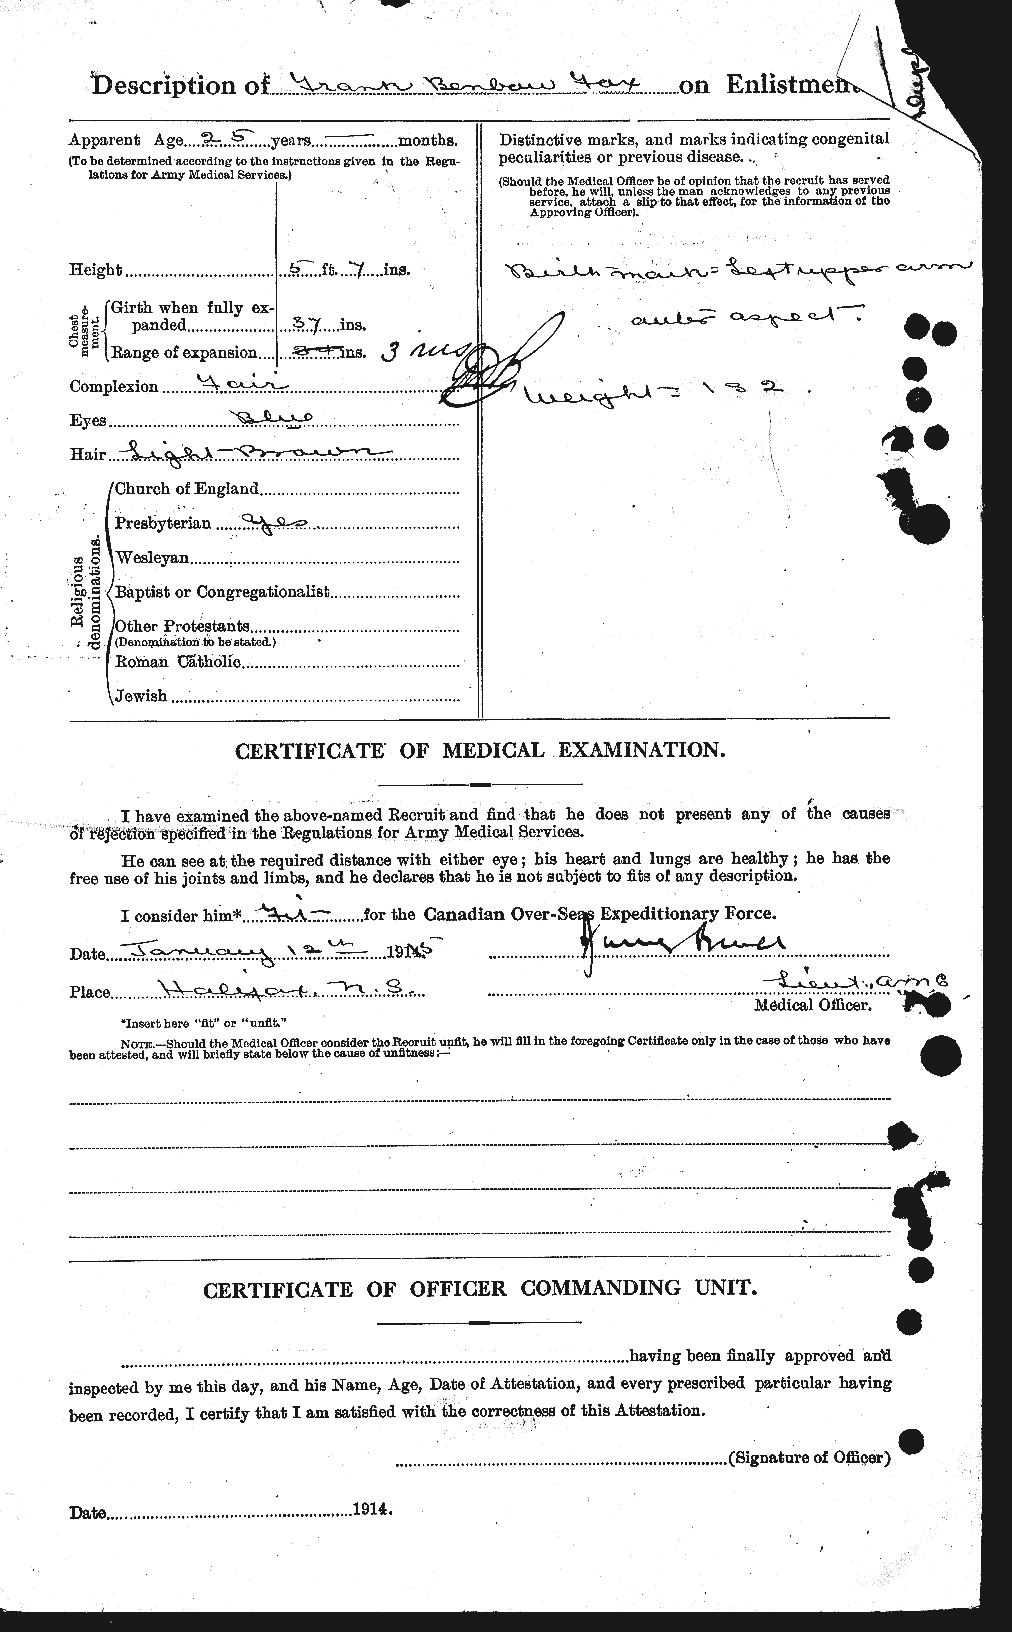 Personnel Records of the First World War - CEF 332456b